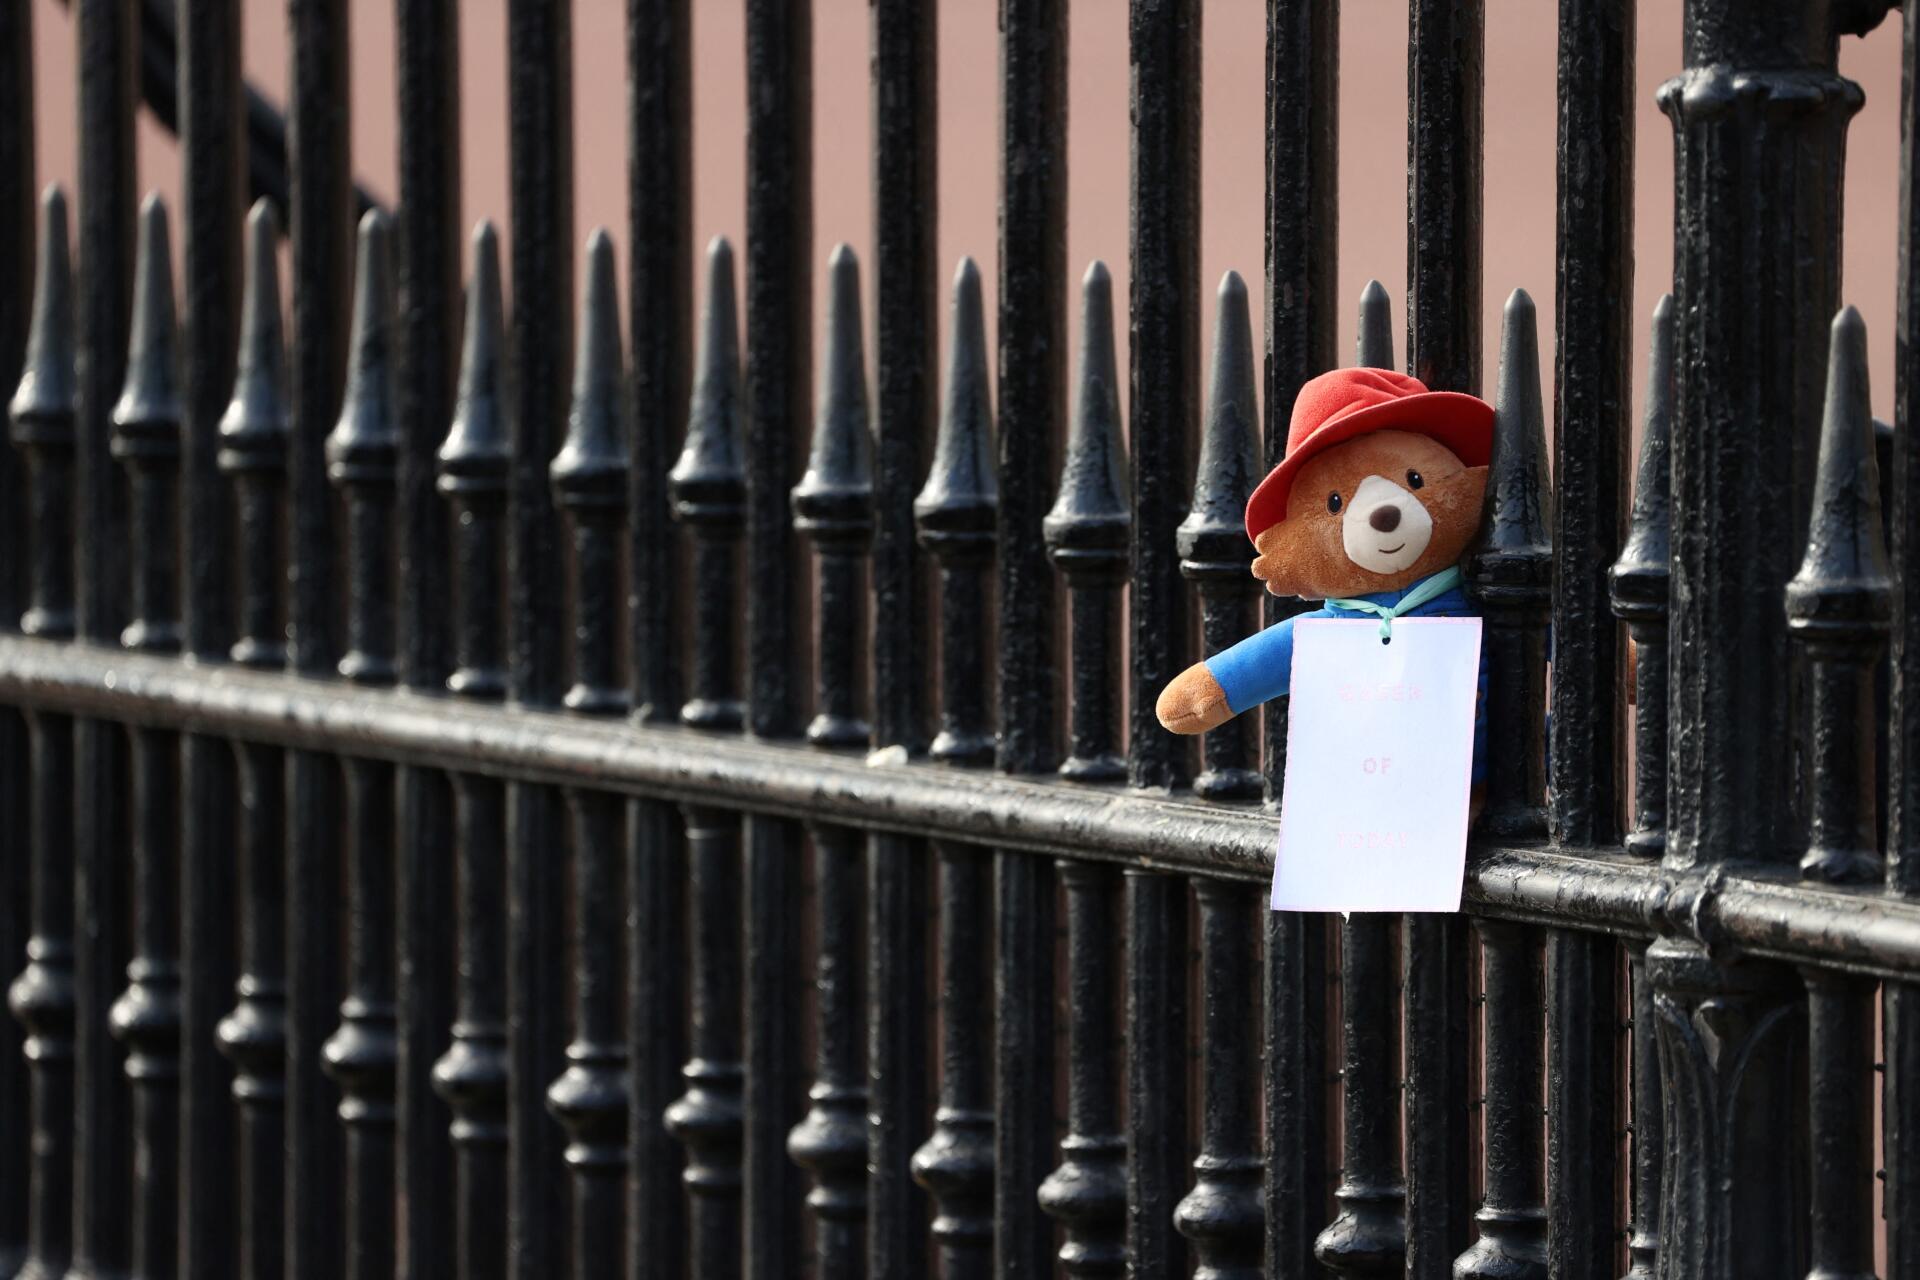 A teddy bear Paddington left in front of Buckingham Palace, in London, on September 10, 2022. Queen Elizabeth II had participated in a humorous short film with the fictional character on the occasion of the jubilee for her 70 years of reign, in June 2022.